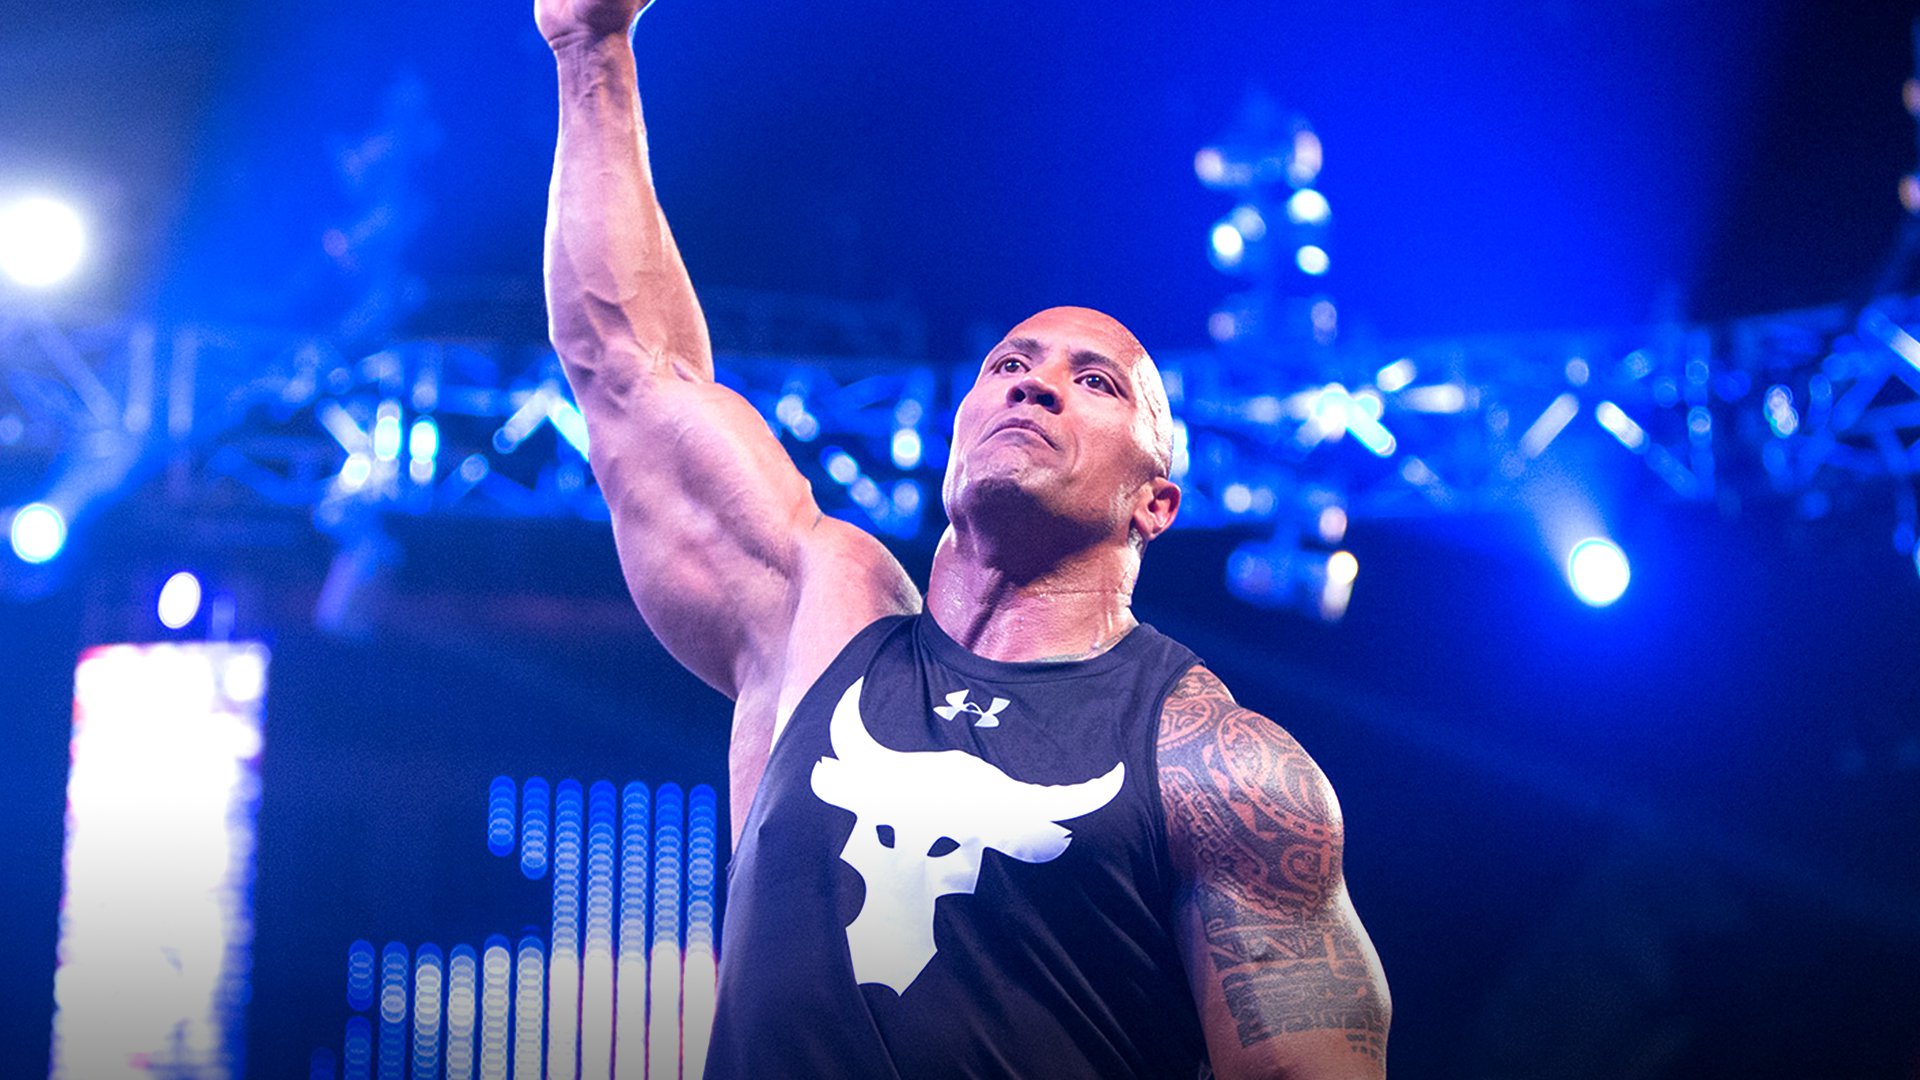 The Rock Reacts to Ava's WWE InRing Debut, Sends Lengthy WrestleMania